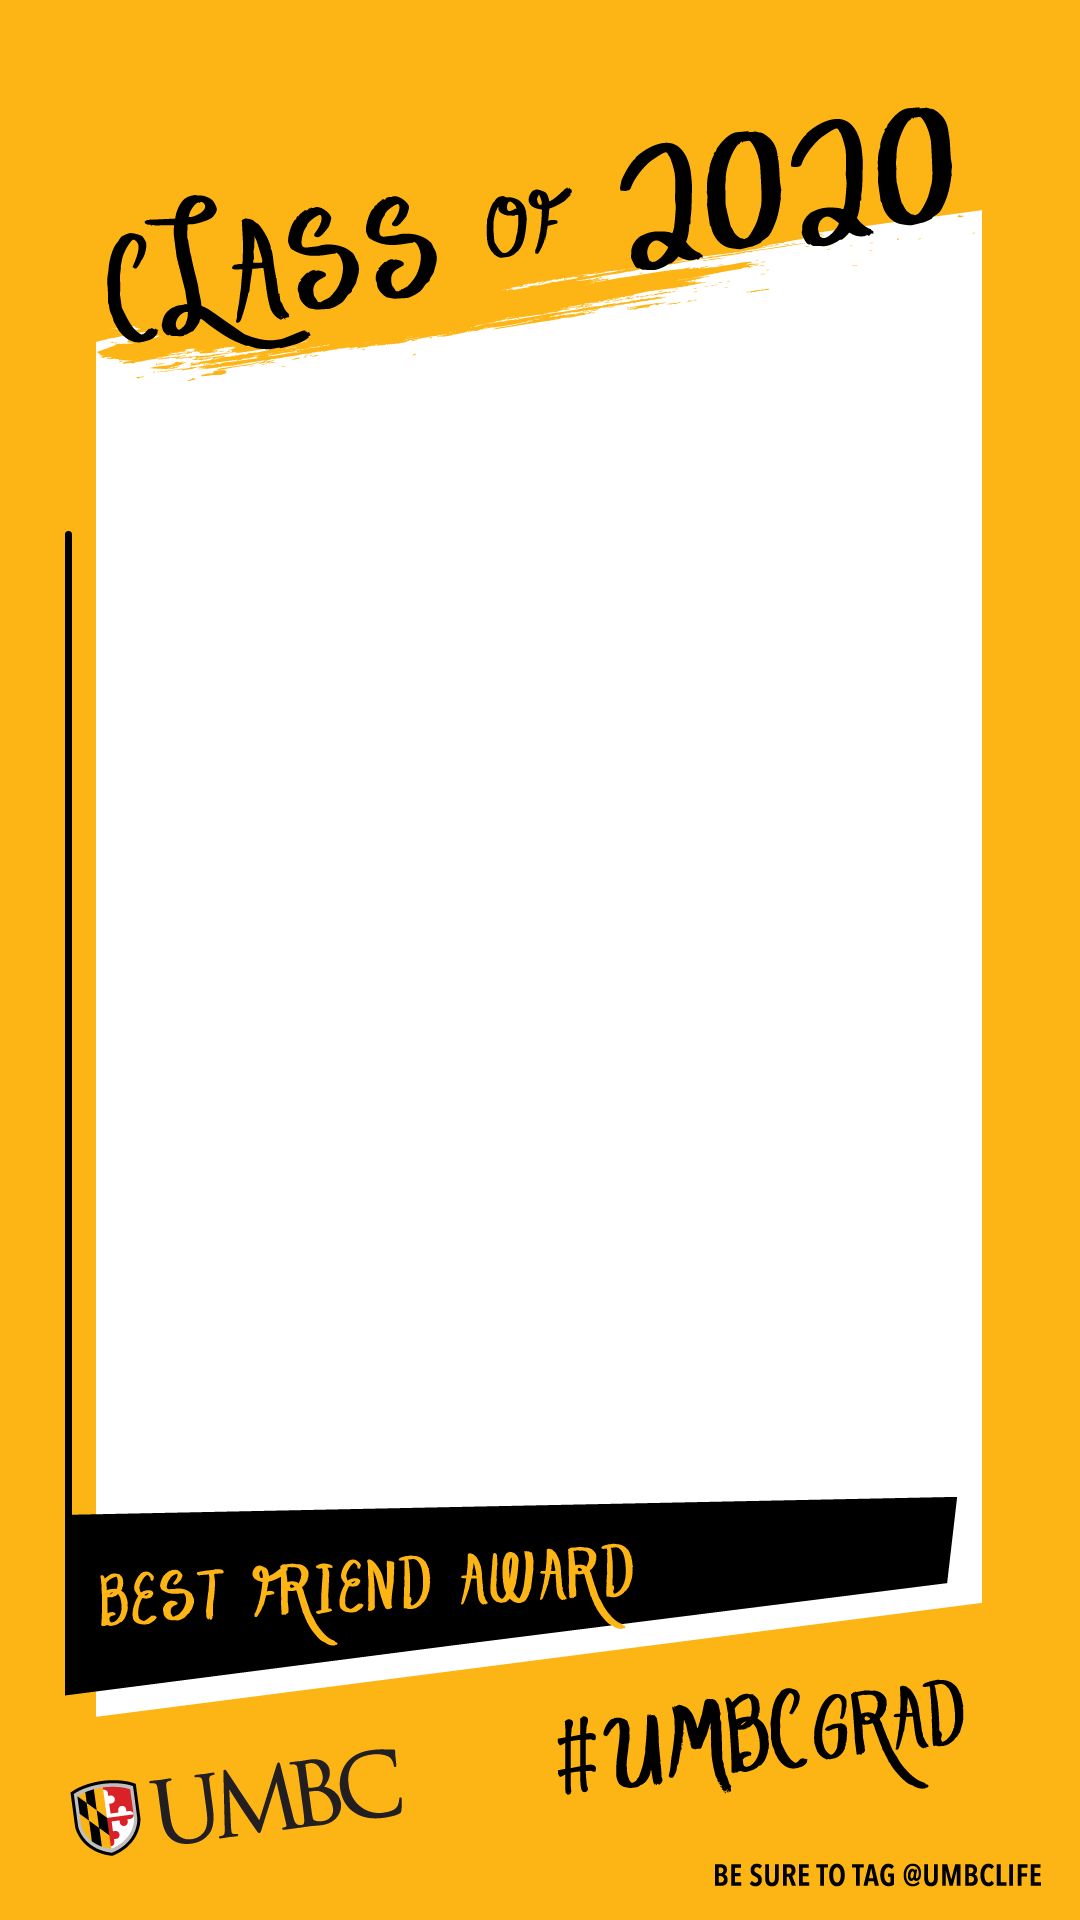 Class of 2020 portrait overlay with gold border. Text on bottom says Best Friend Award above UMBC logo.